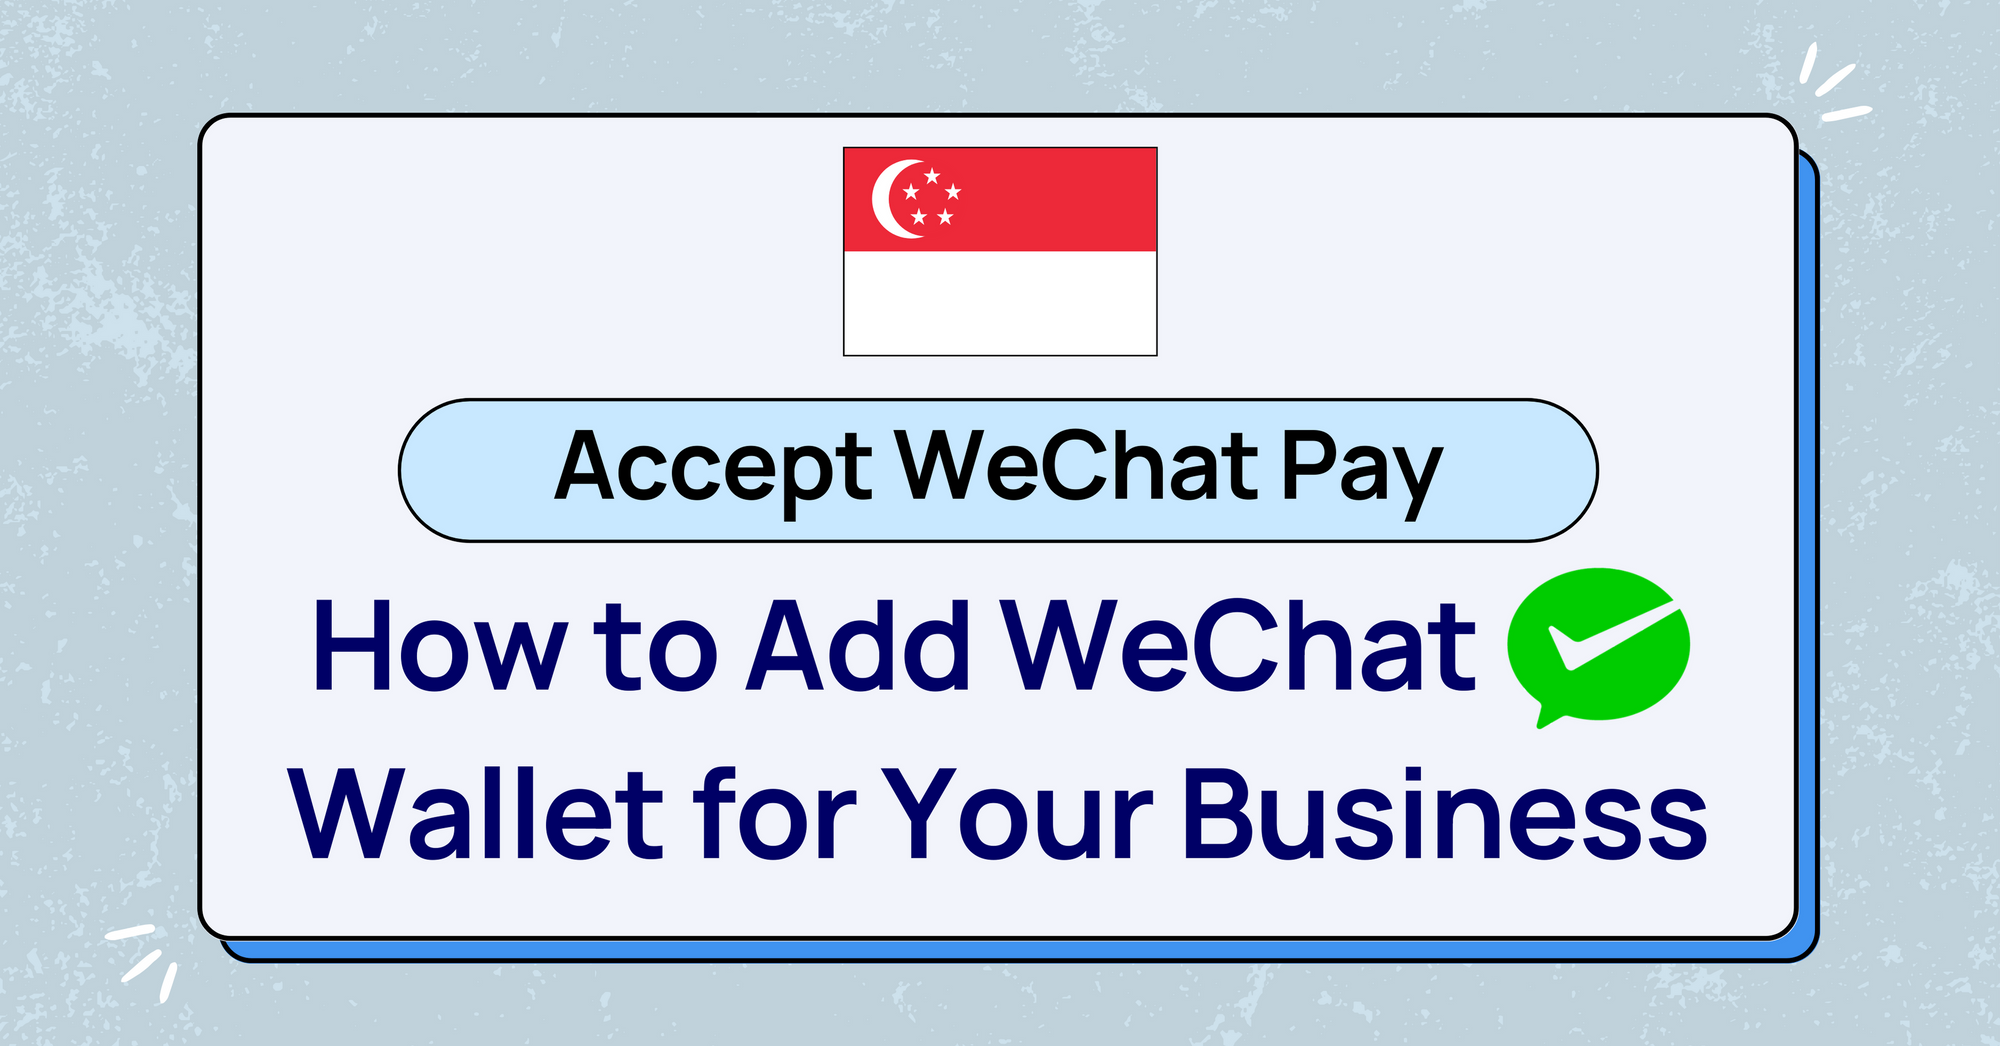 Accept WeChat Pay in Singapore: How to Add WeChat Wallet for Your Business